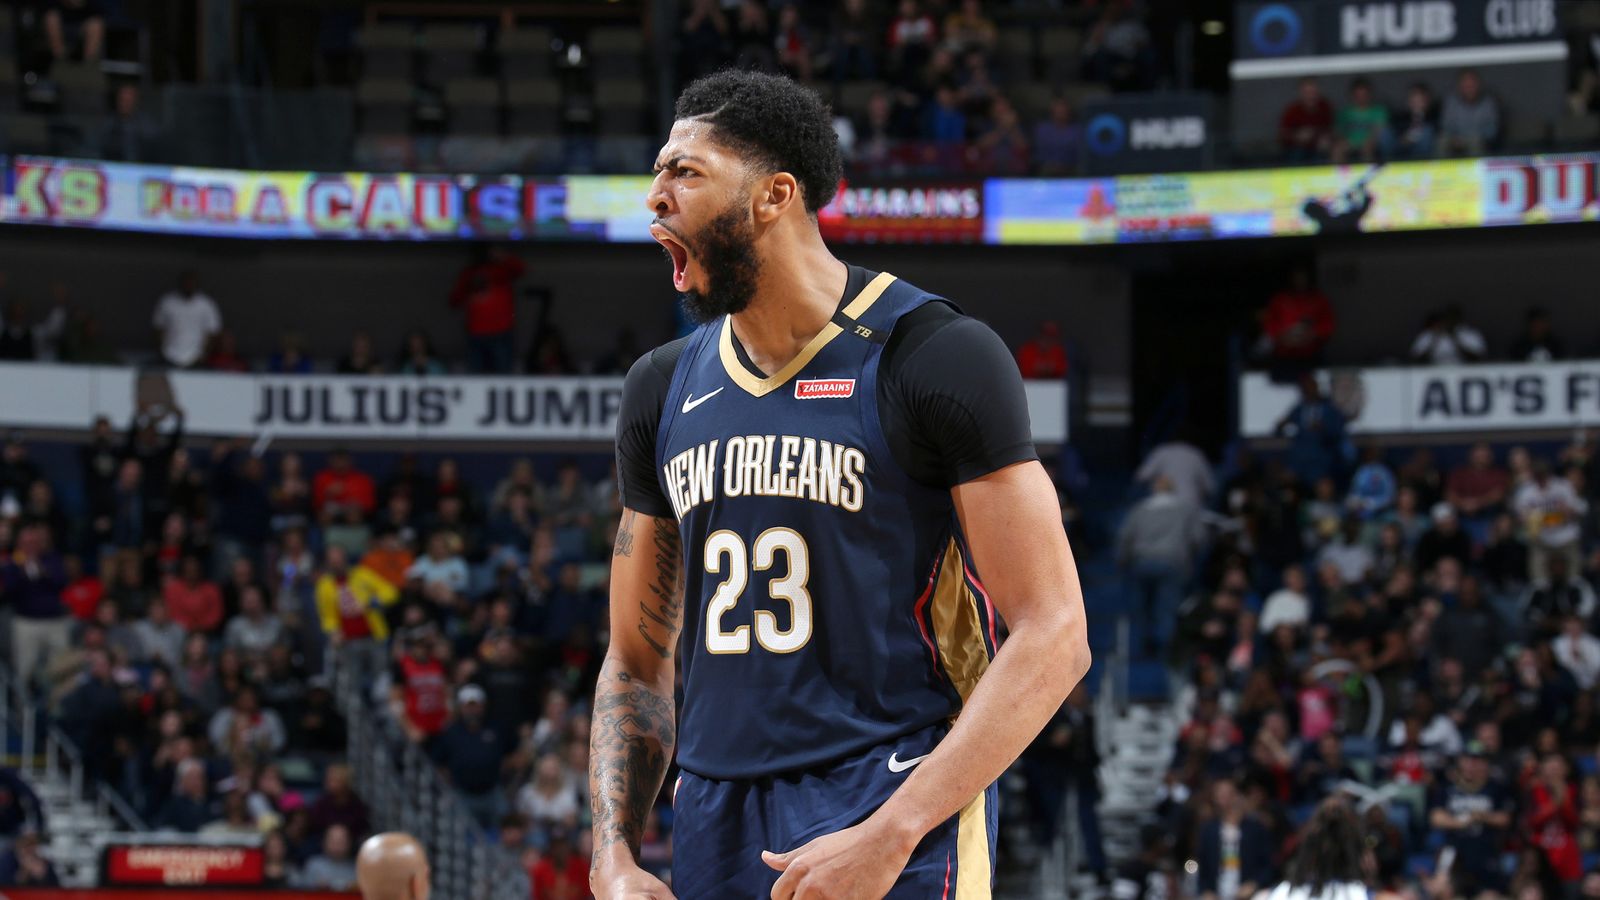 New Orleans Pelicans to trade Anthony Davis to Los Angeles Lakers - reports | NBA News ...